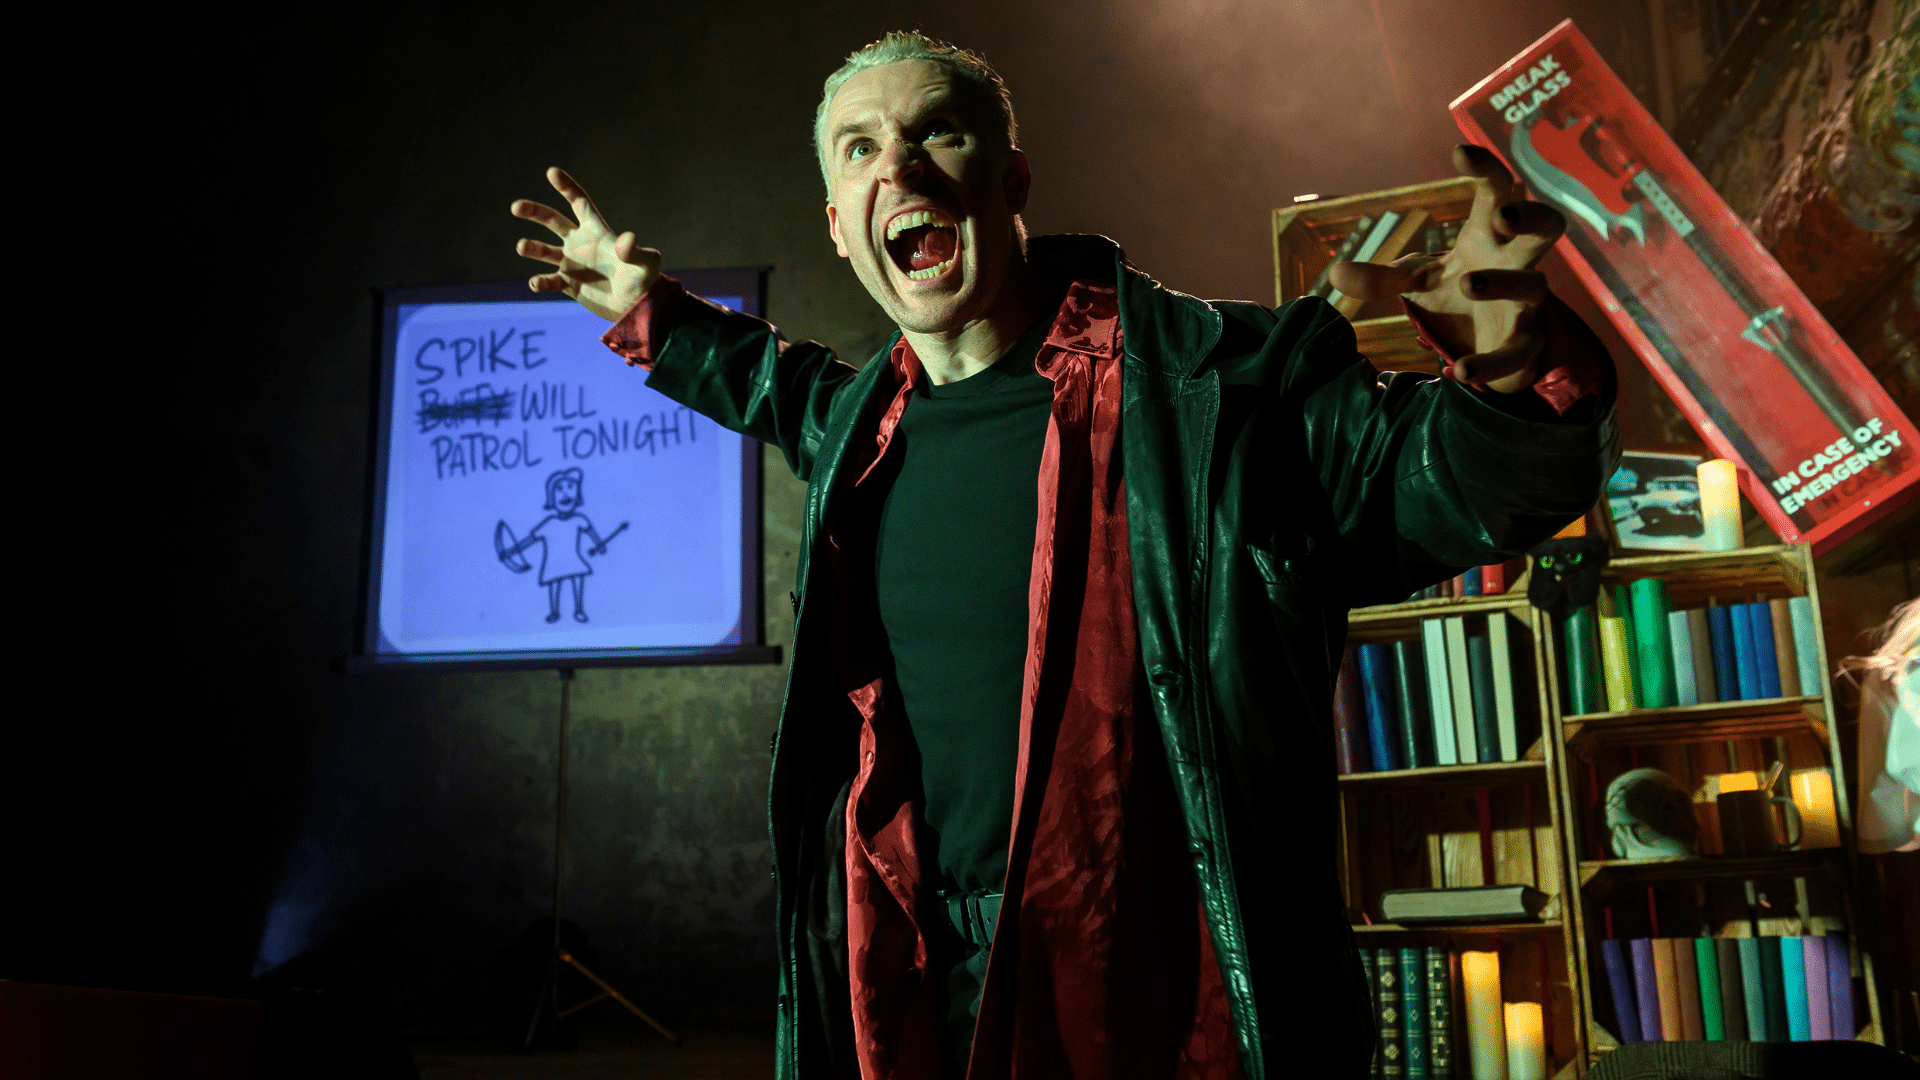 Buffy Revamped production photo - Brendan Murphy, his arms out wide holding his fingers like claws, his mouth wide open as if roaring. He wears an open red shirt underneath a black leather jacket. In the background there are bookshelves, a red 'break glass in case of emergency' case with an axe inside and a small screen with the words 'Spike will patrol tonight' handwritten with the word 'Buffy' crossed out where 'Spike' is. There is a crude childlike drawing of a person holding a bow and arrow underneath.